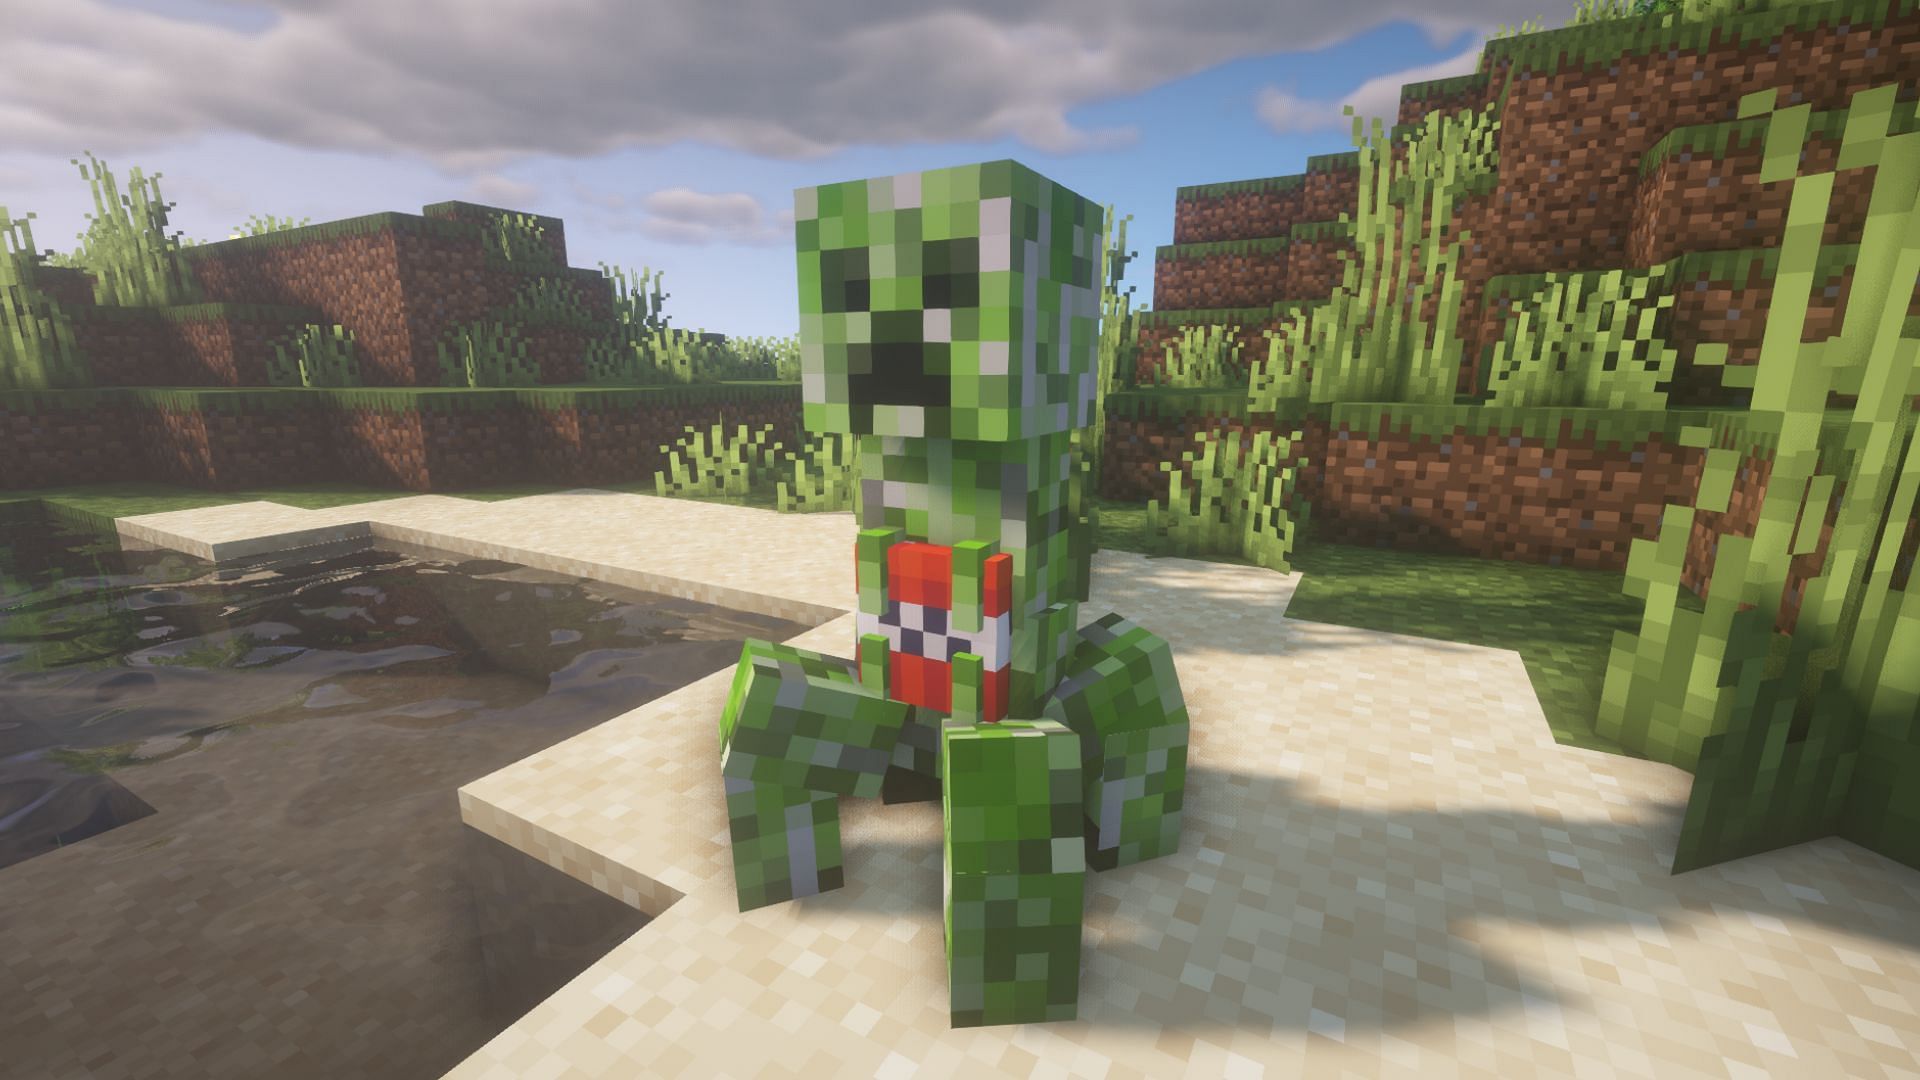 Zinkenite mobs enhance textures of every mob in Minecraft (Image via CurseForge)